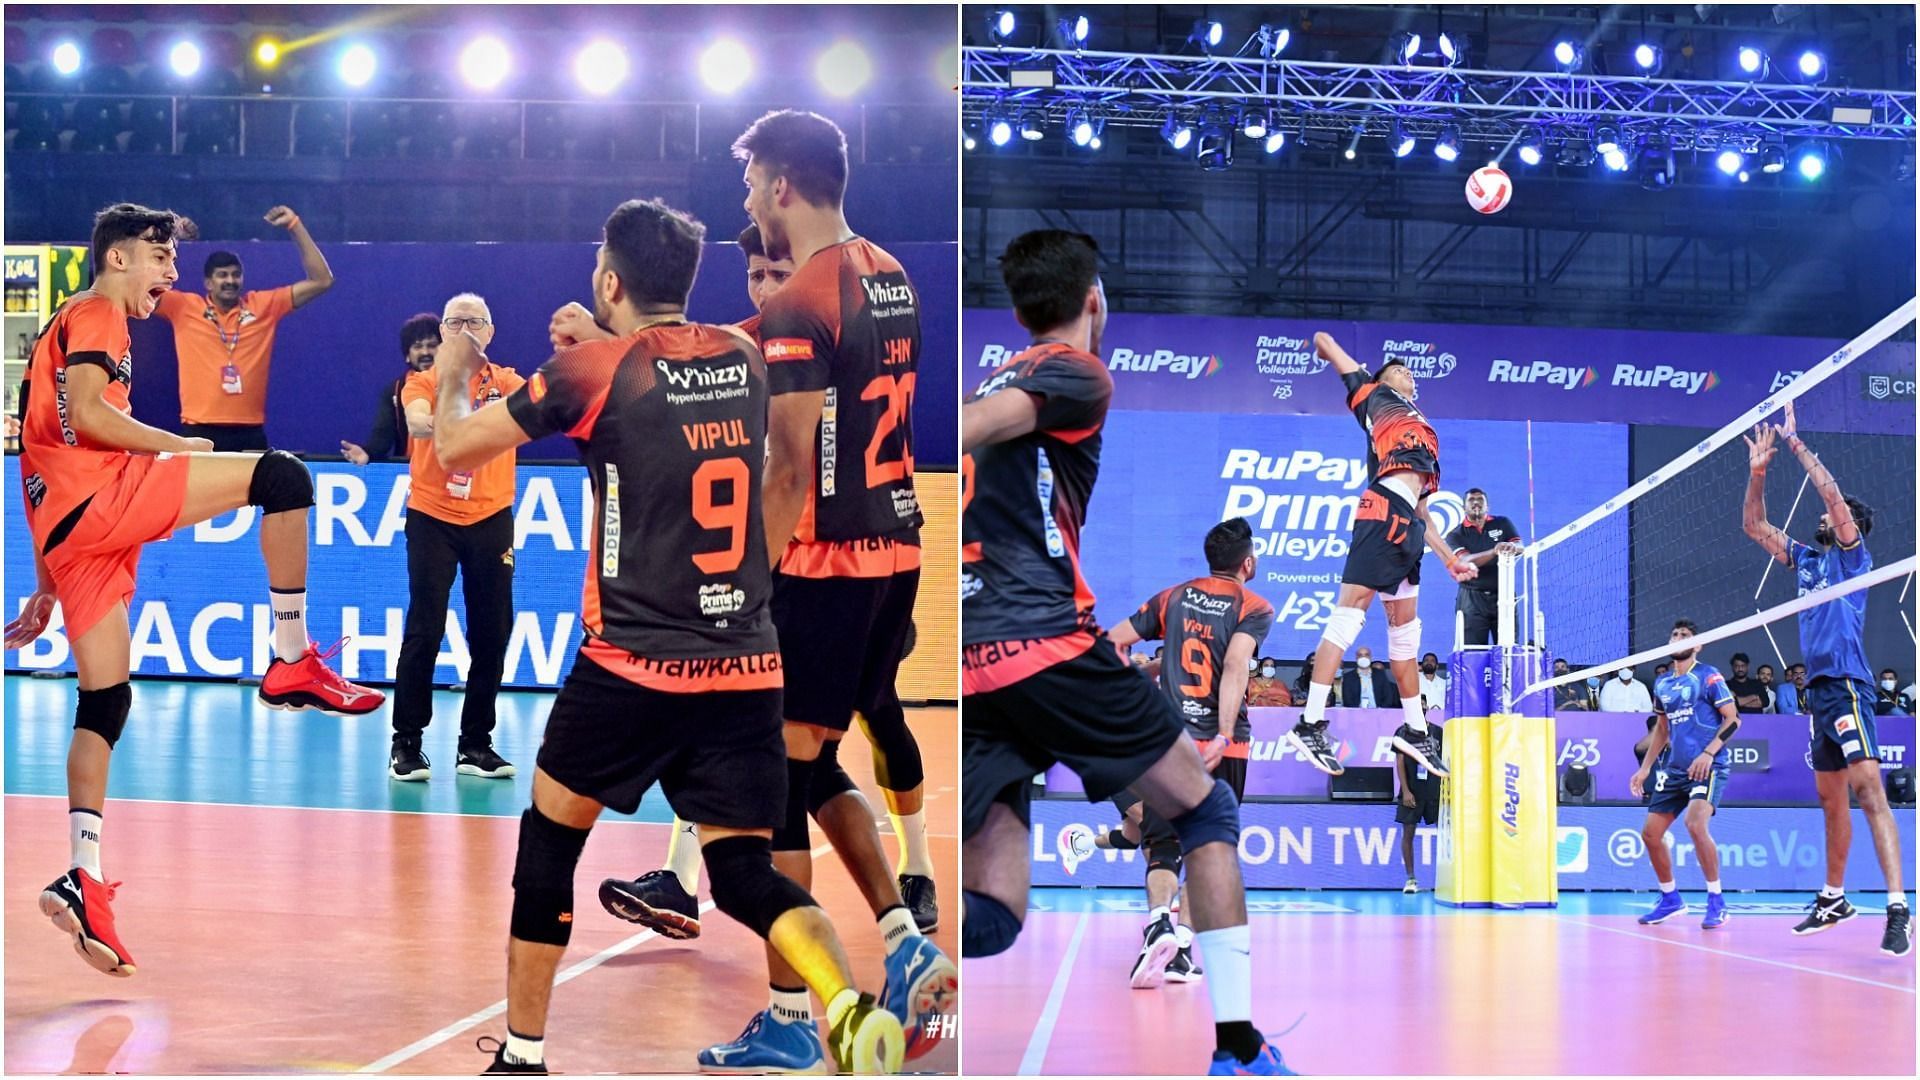 Hyderabad Black Hawks in action during their first match (Pic Credit: PVL)